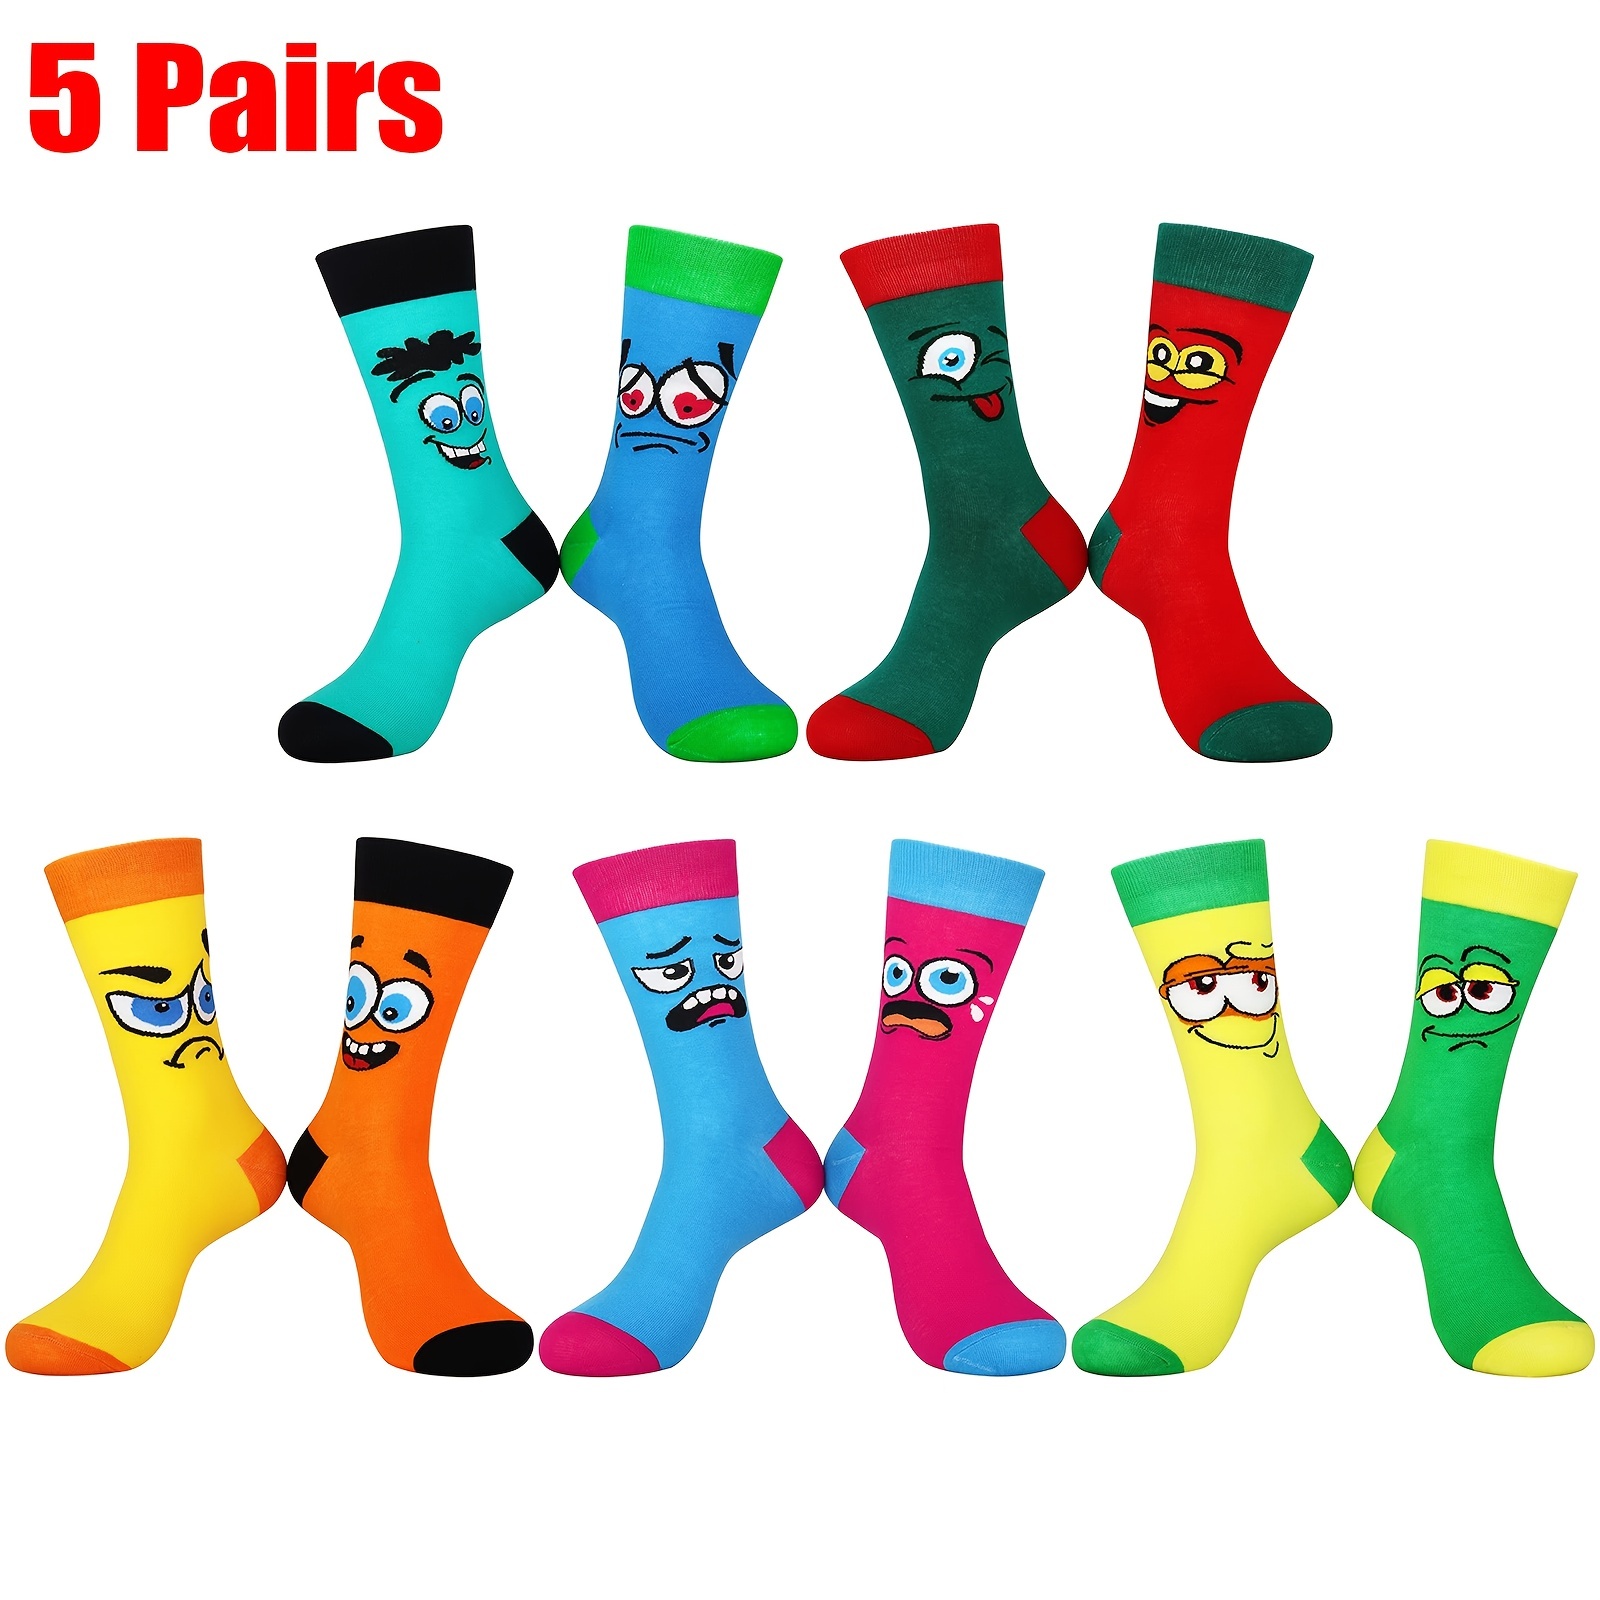 

5 Pairs Men's Funny Face Patterned Crew Socks, Funny Crazy Cool Socks For Men's Christmas Gifts